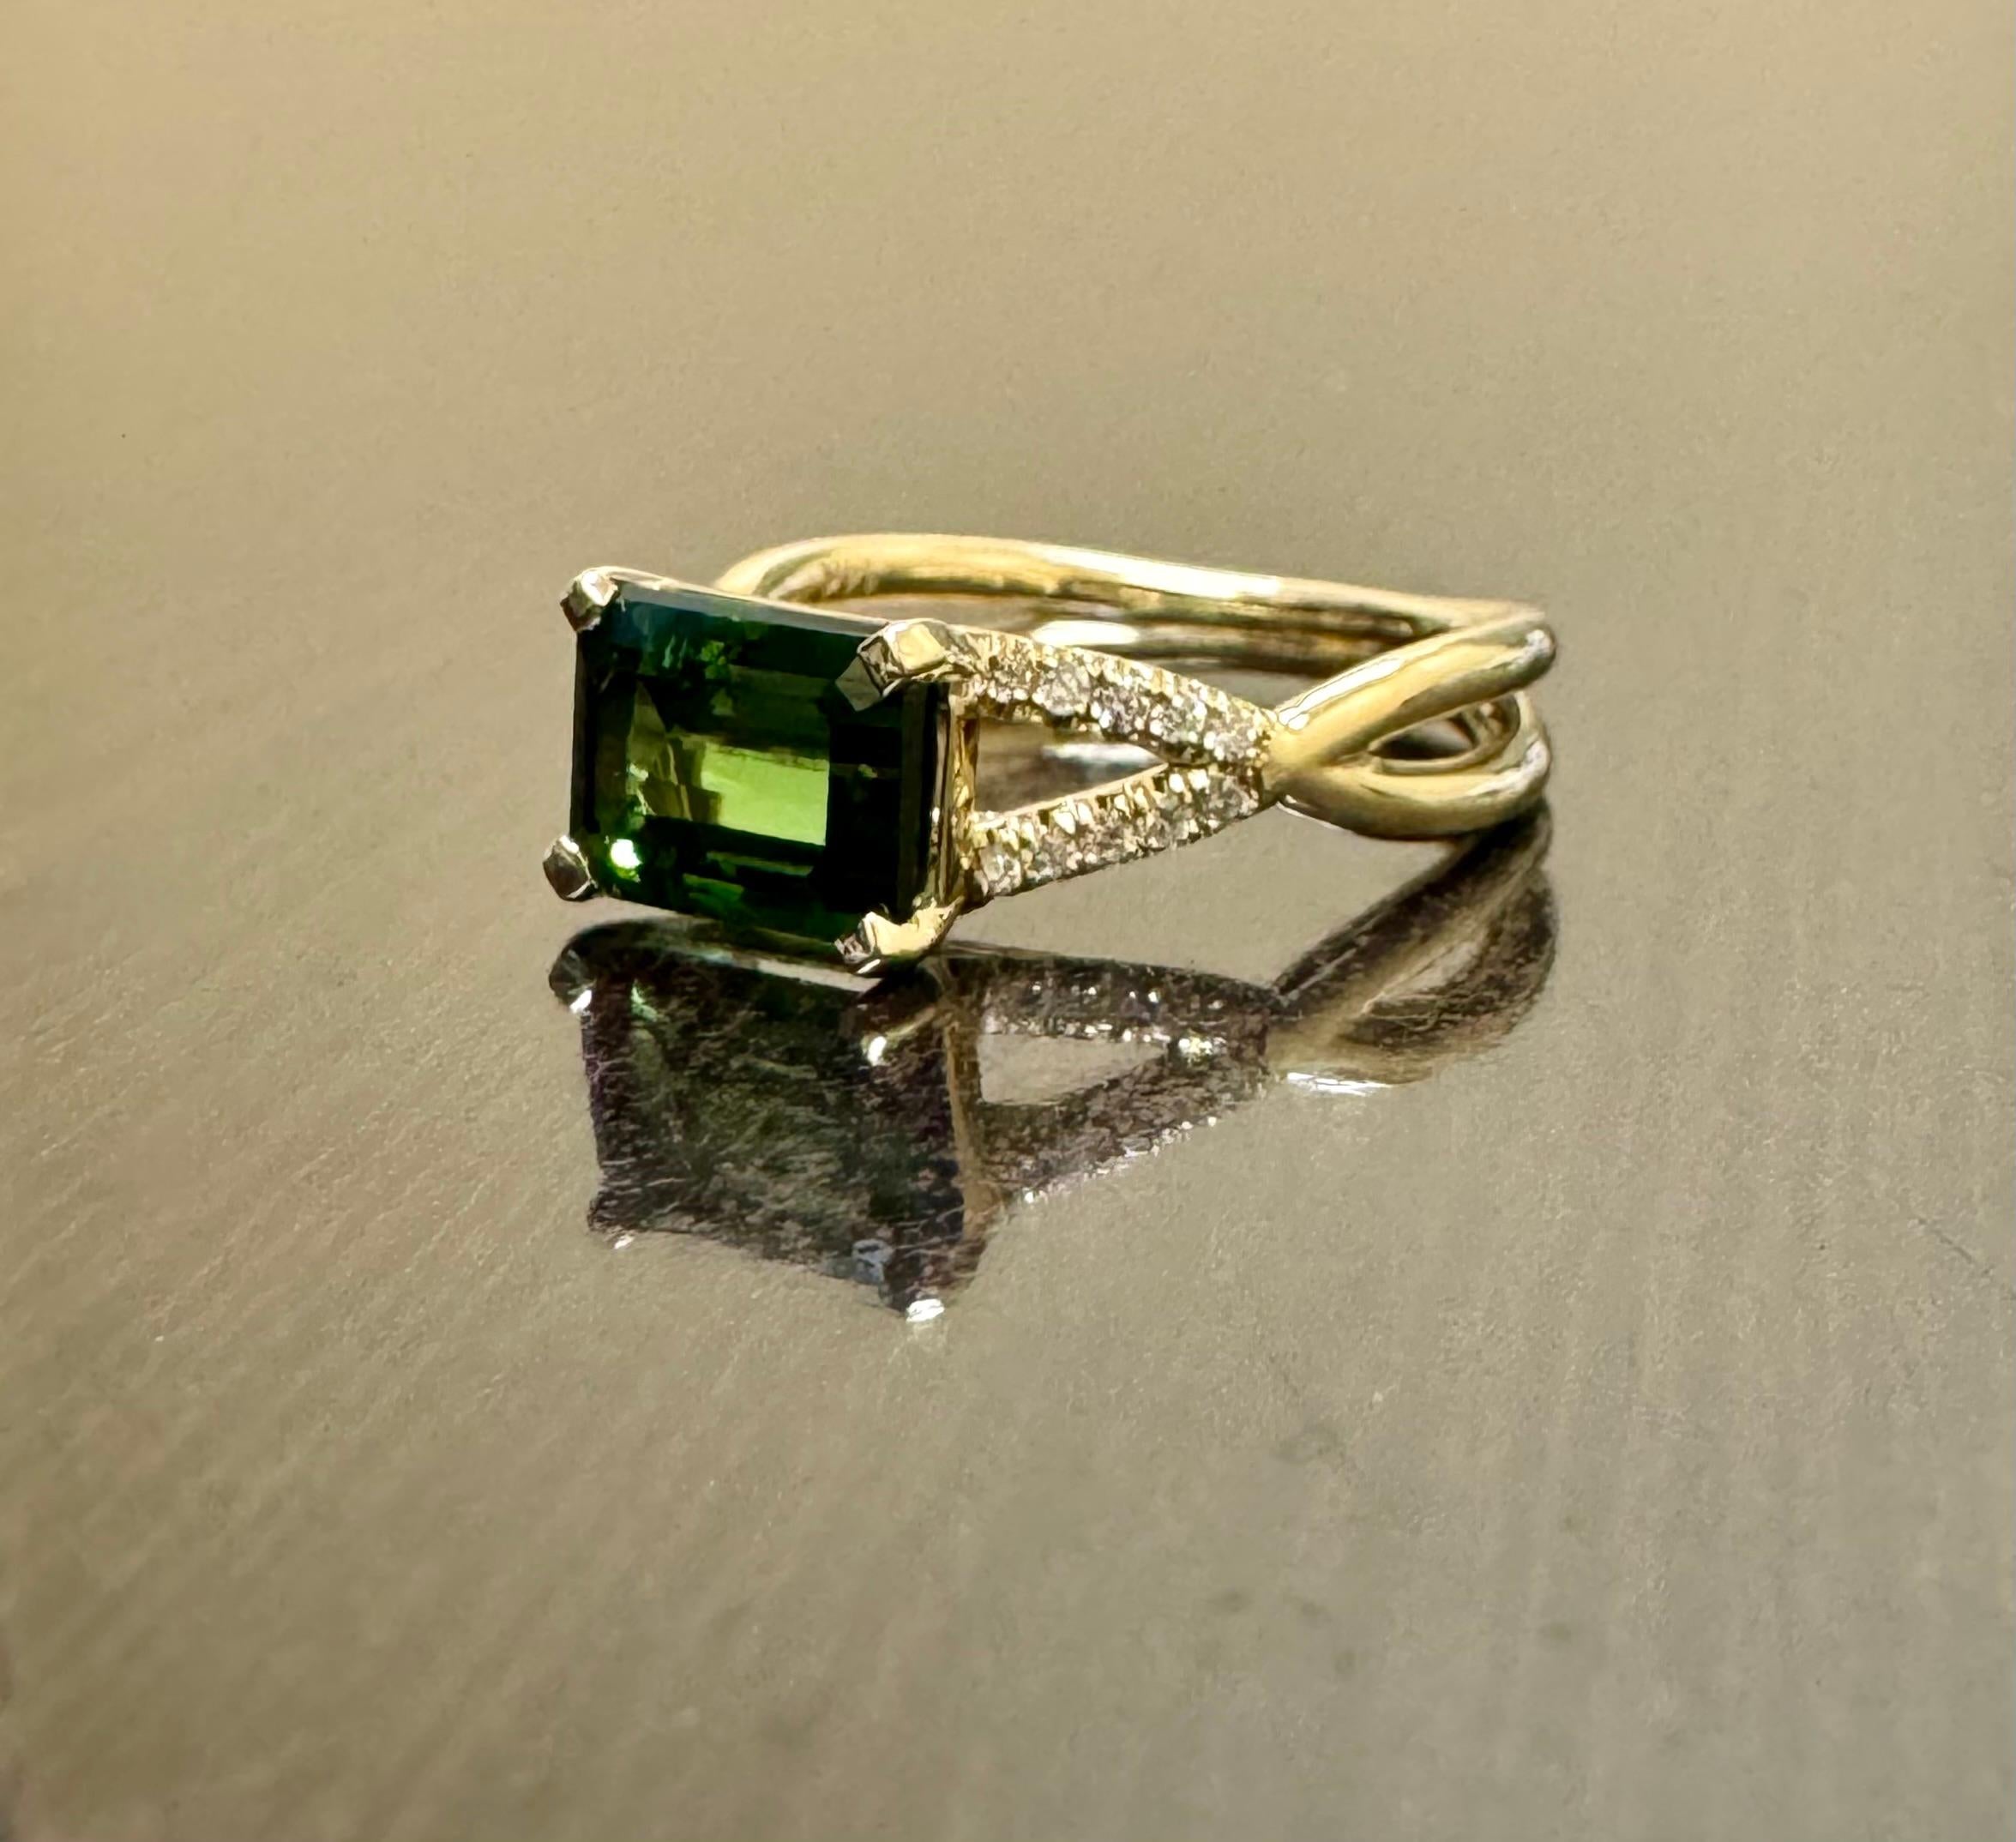 DeKara Designs Collection

Our latest design! An Elegant and Lustrous Elongated Emerald Cut Teal Tourmaline Handmade in 14K Yellow Gold.

Metal- 14K Yellow Gold, .583.

Stones- Genuine Emerald Cut Green Tourmaline 2.06 Carats, 20 Round Diamonds F-G